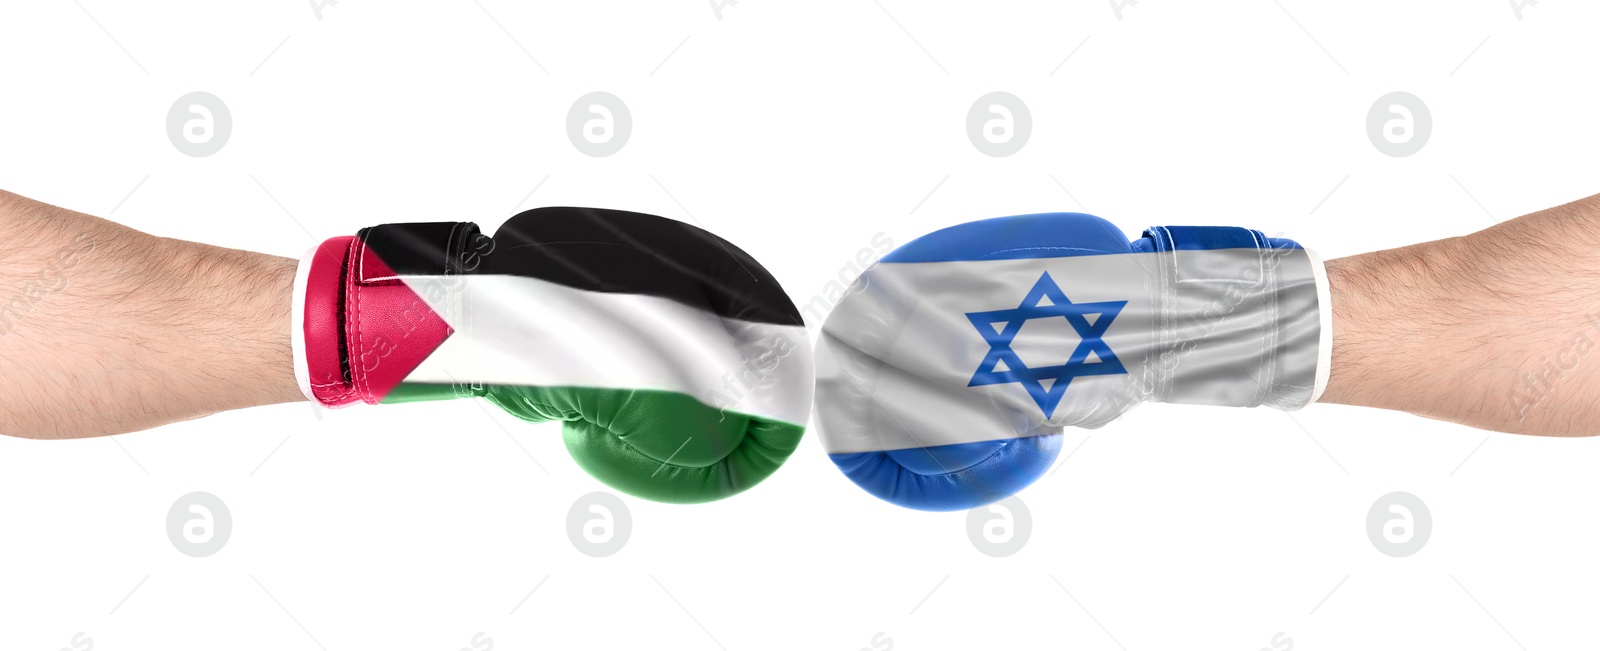 Image of Political conflict. Men in boxing gloves with flags of Israel and Palestine fighting on white background, closeup